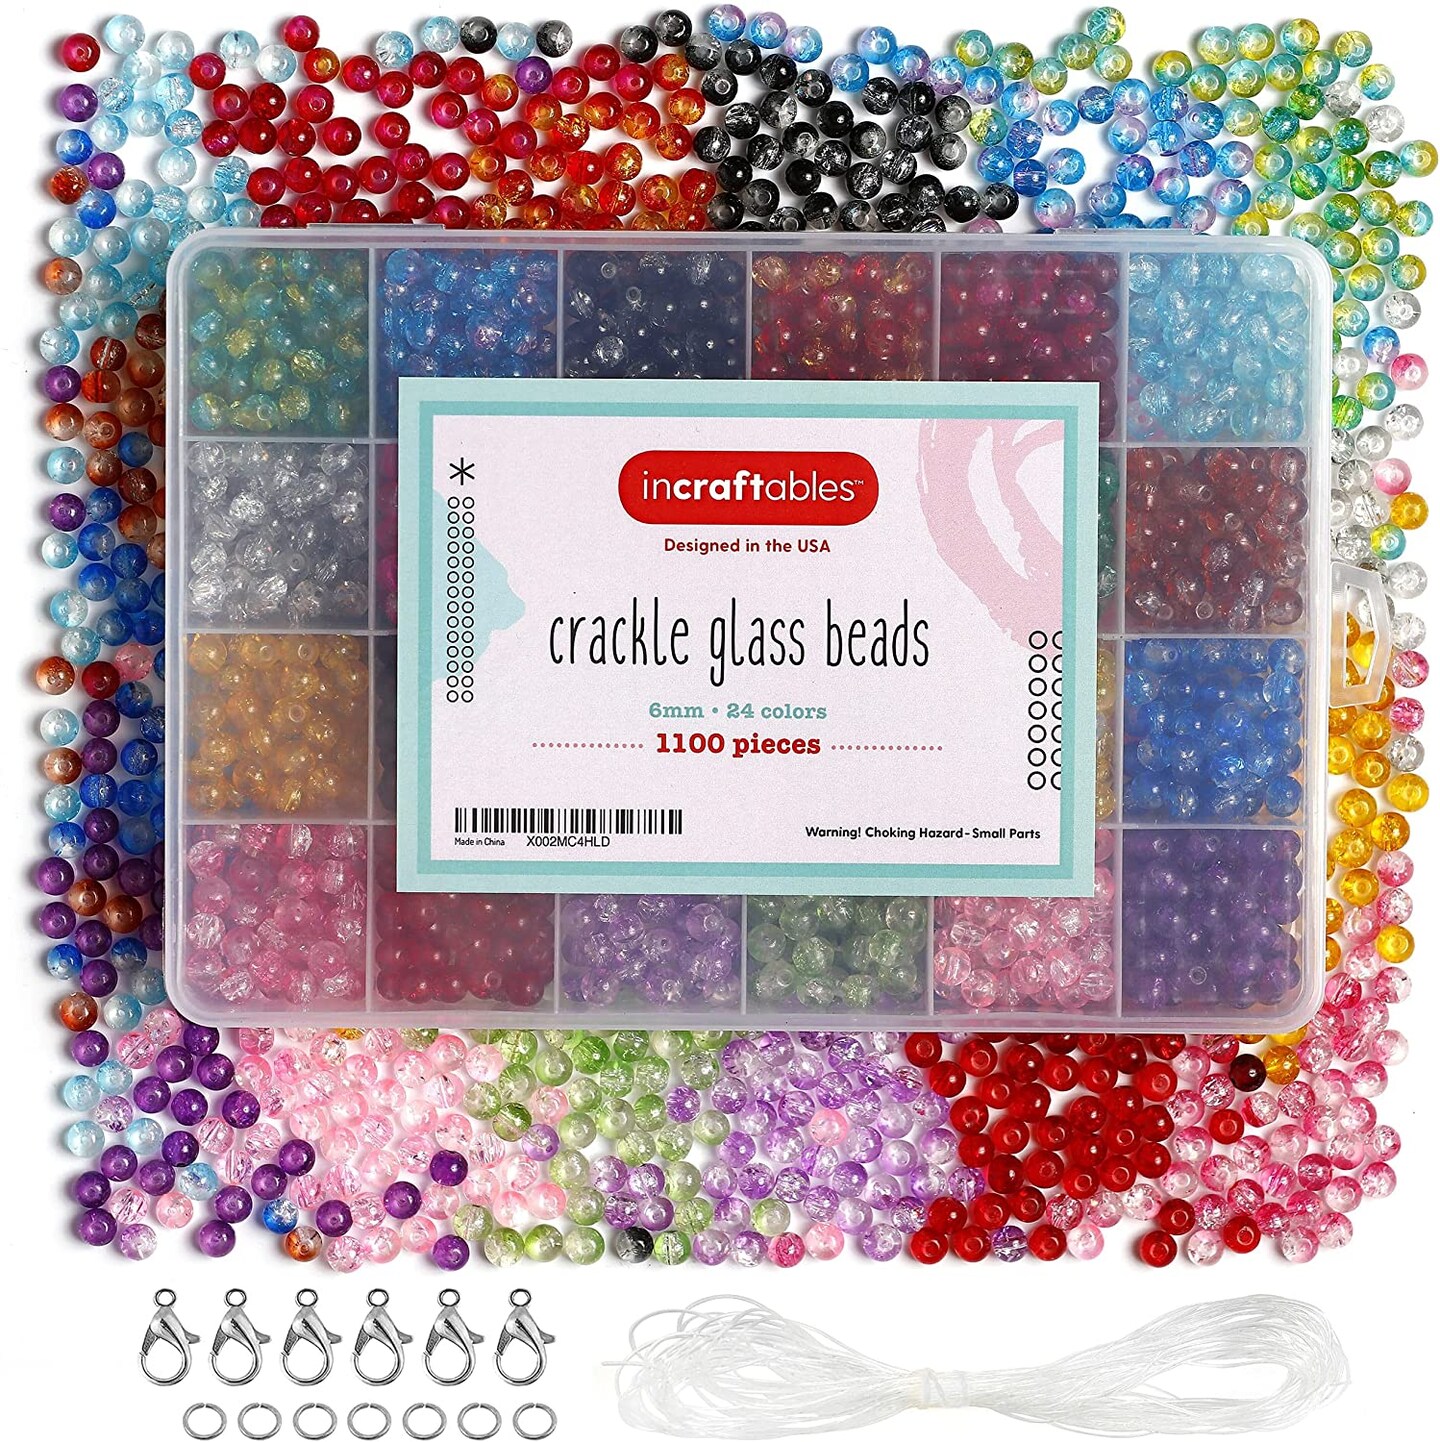 Incraftables Crackle Glass Beads 24 Colors 1100pcs 6mm Kit for Jewelry Making, Hair Accessories, Bracelets, &#x26; Crafts. Multicolor Lampwork Assorted Crafting Bead with Organizer Box for Kids &#x26; Adults